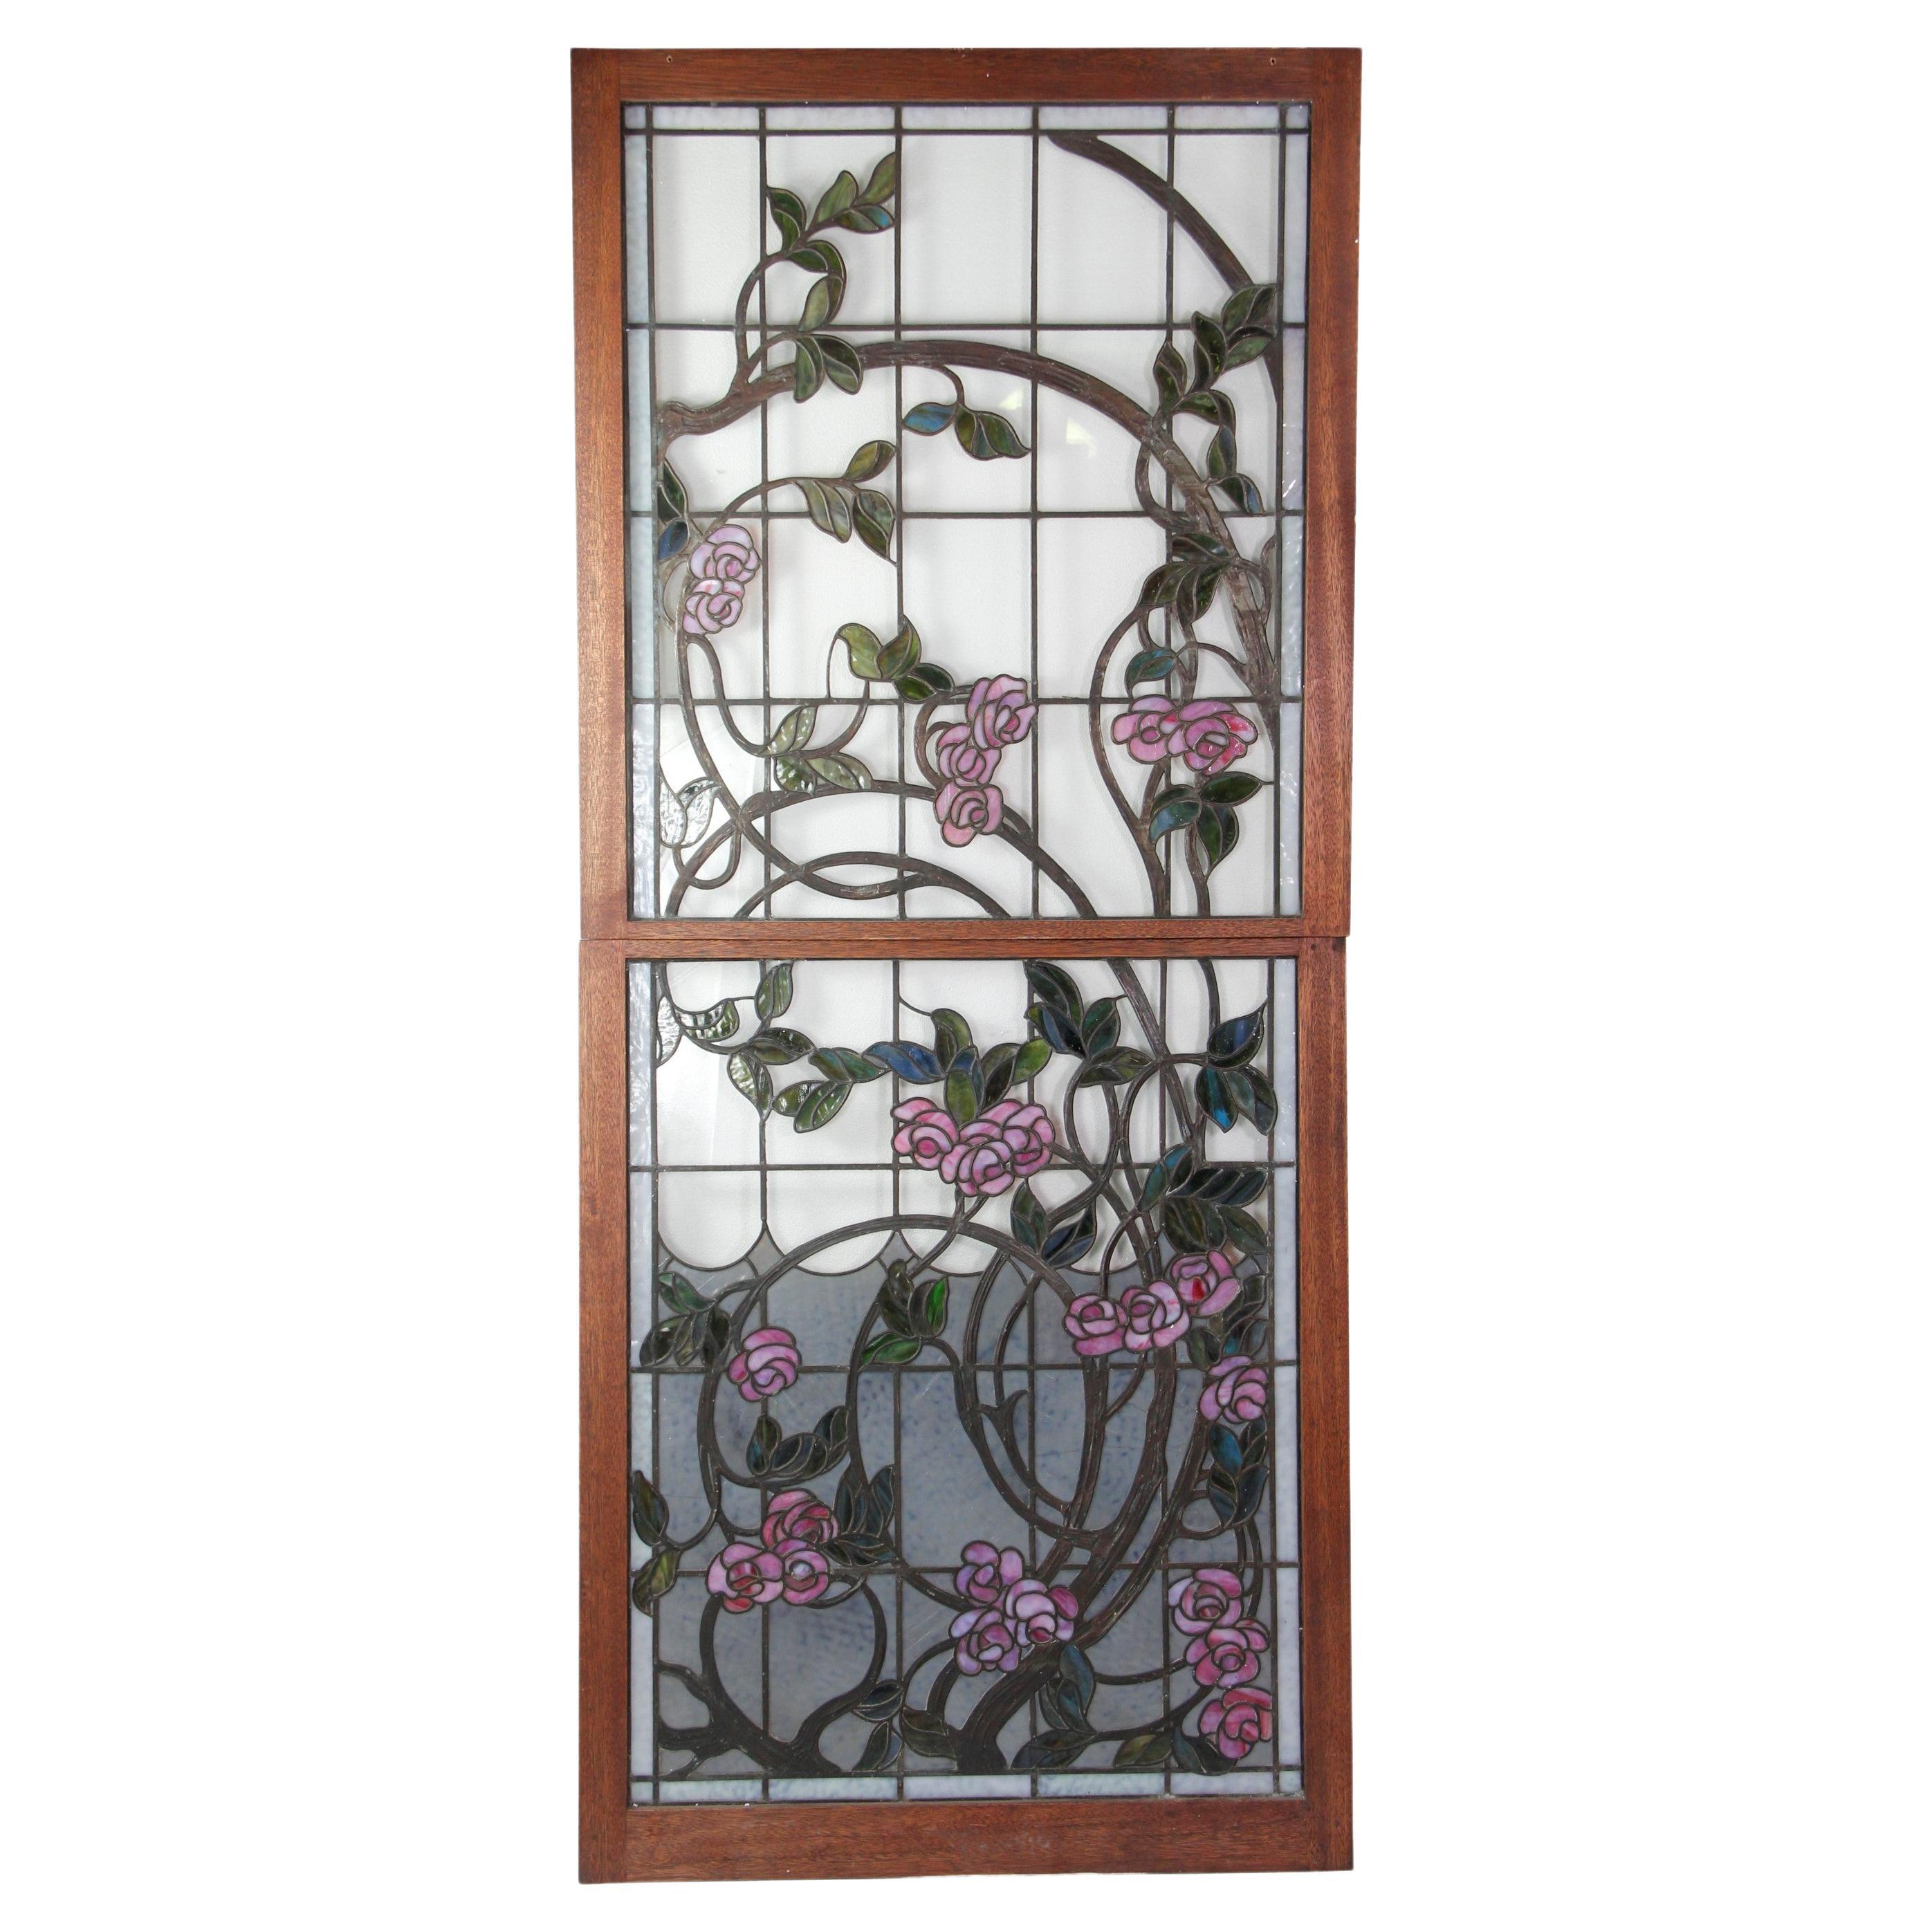 1880s Pair Floral Water Lilies Stained Glass Windows Set from a Kentucky Mansion